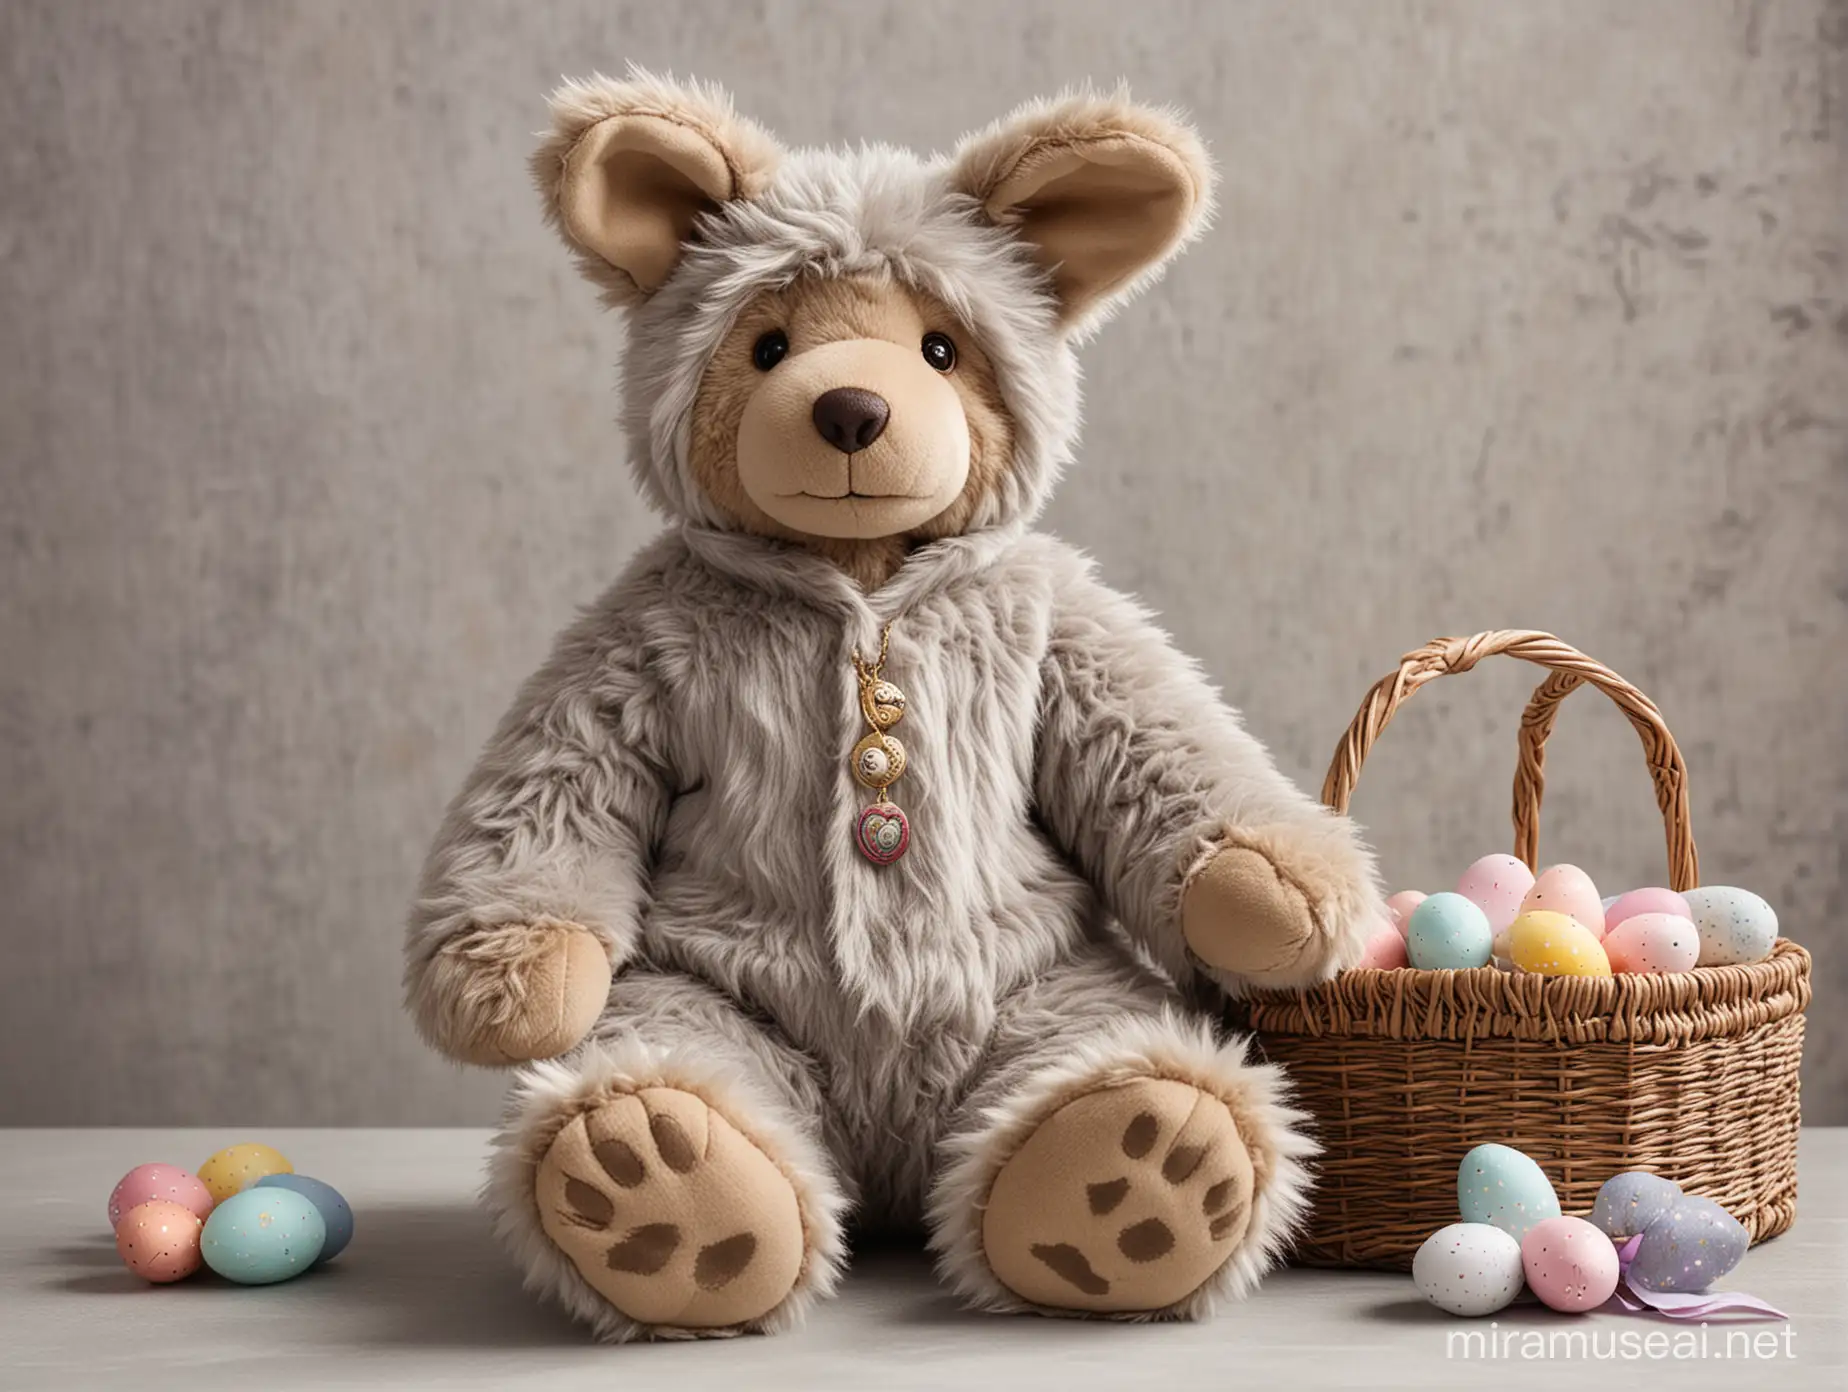 Grey Teddy Bear in Easter Bunny Costume Holding Basket of Easter Eggs